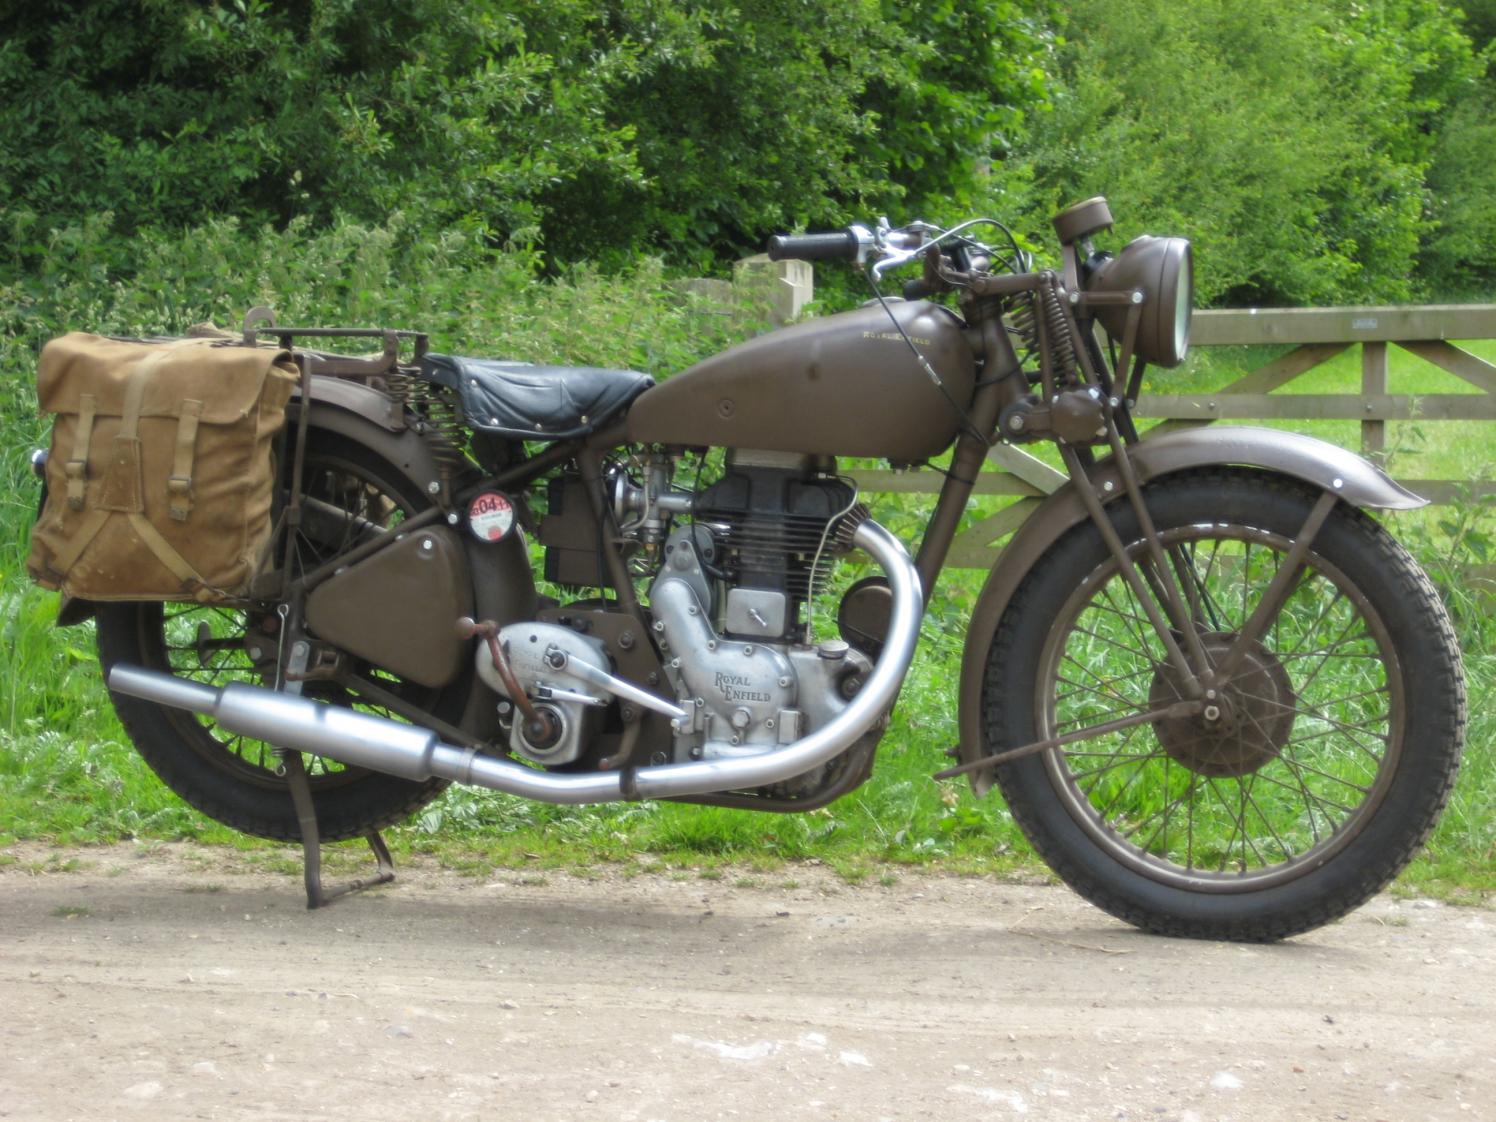 ROYAL ENFIELD WD CO stare motocykle